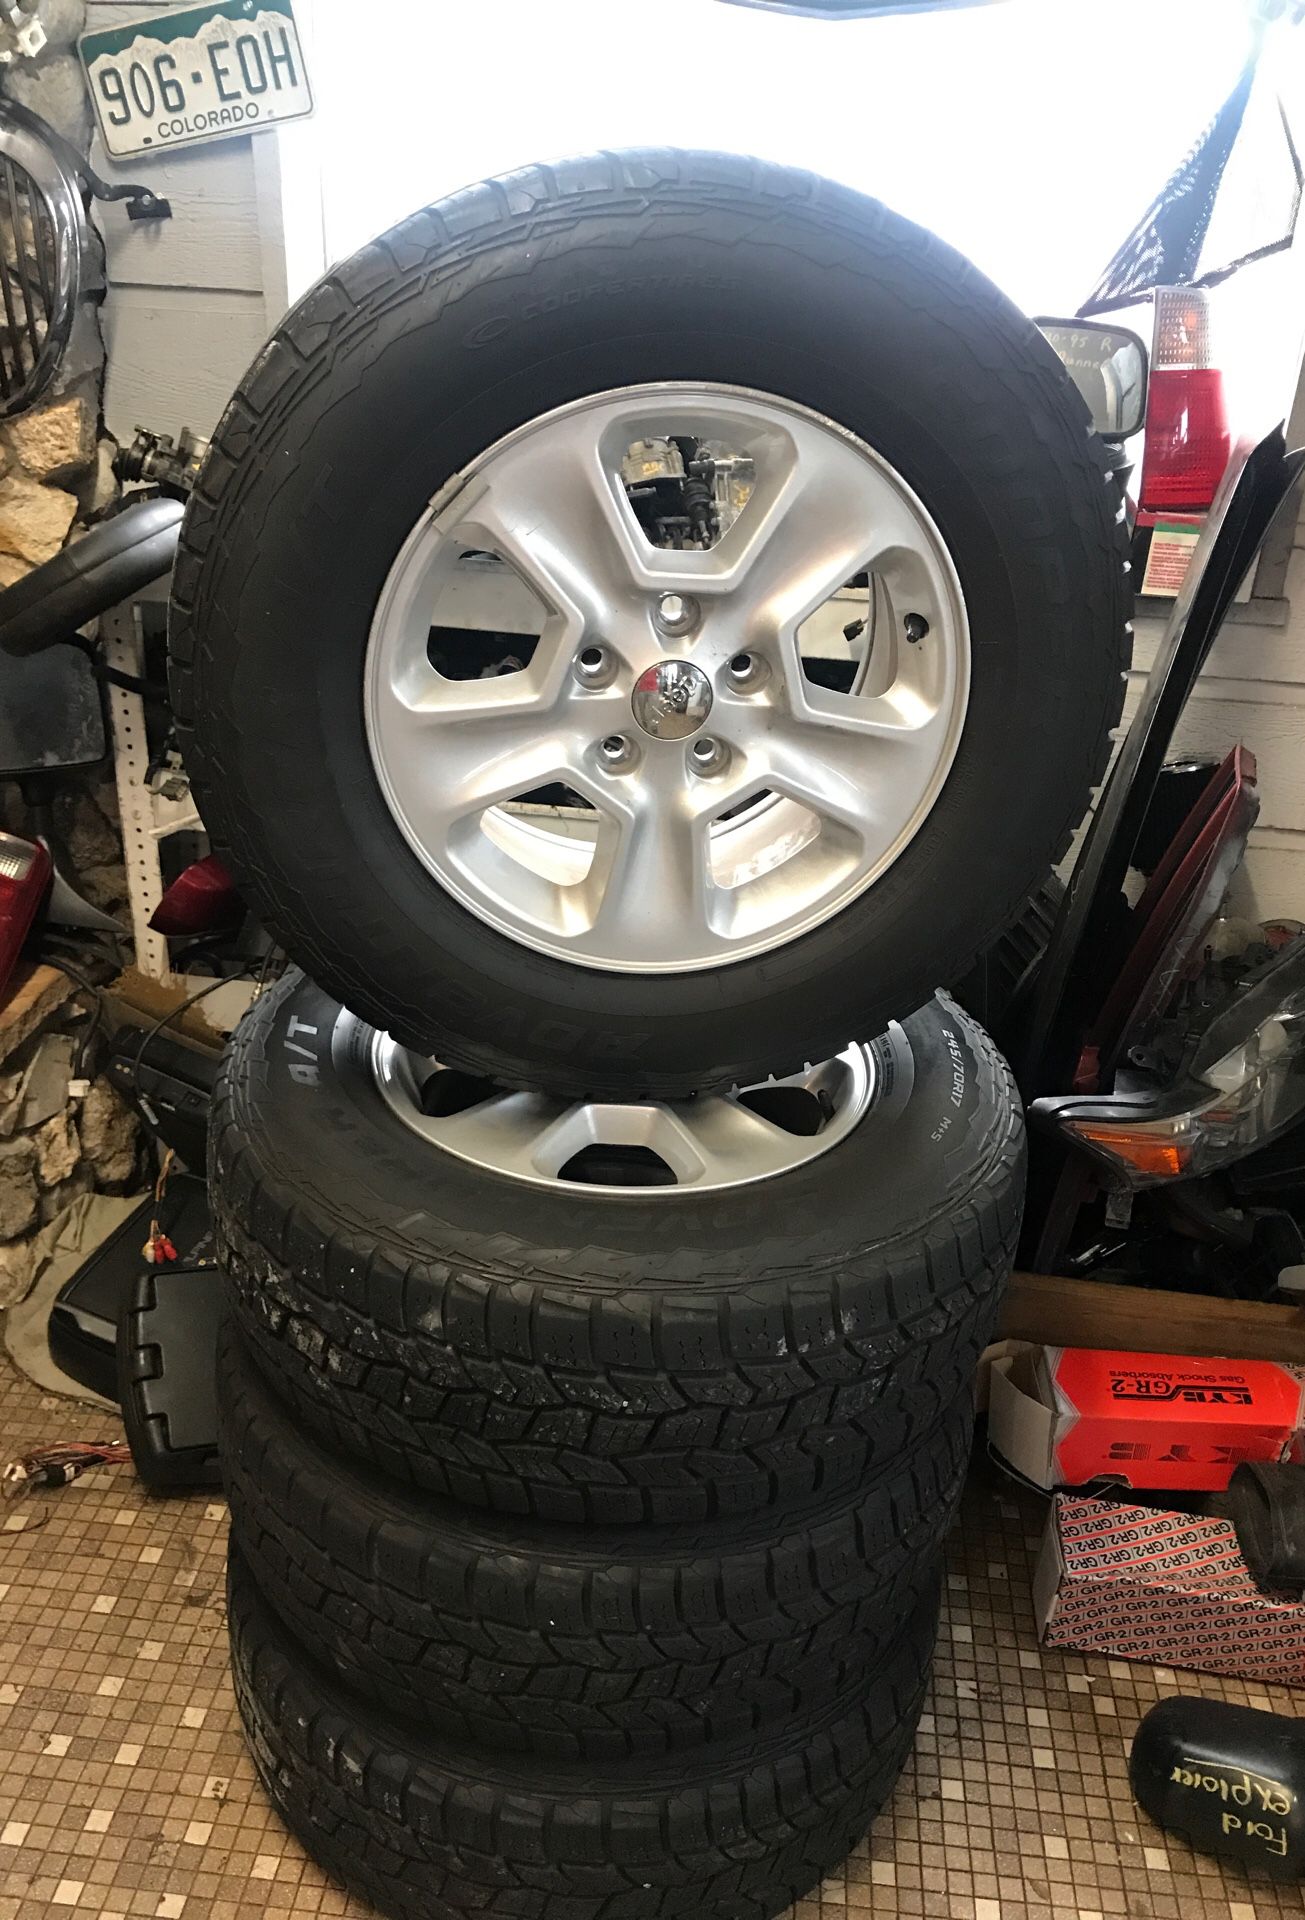 2015 Jeep Grand Cherokee wheels and tires 5x127